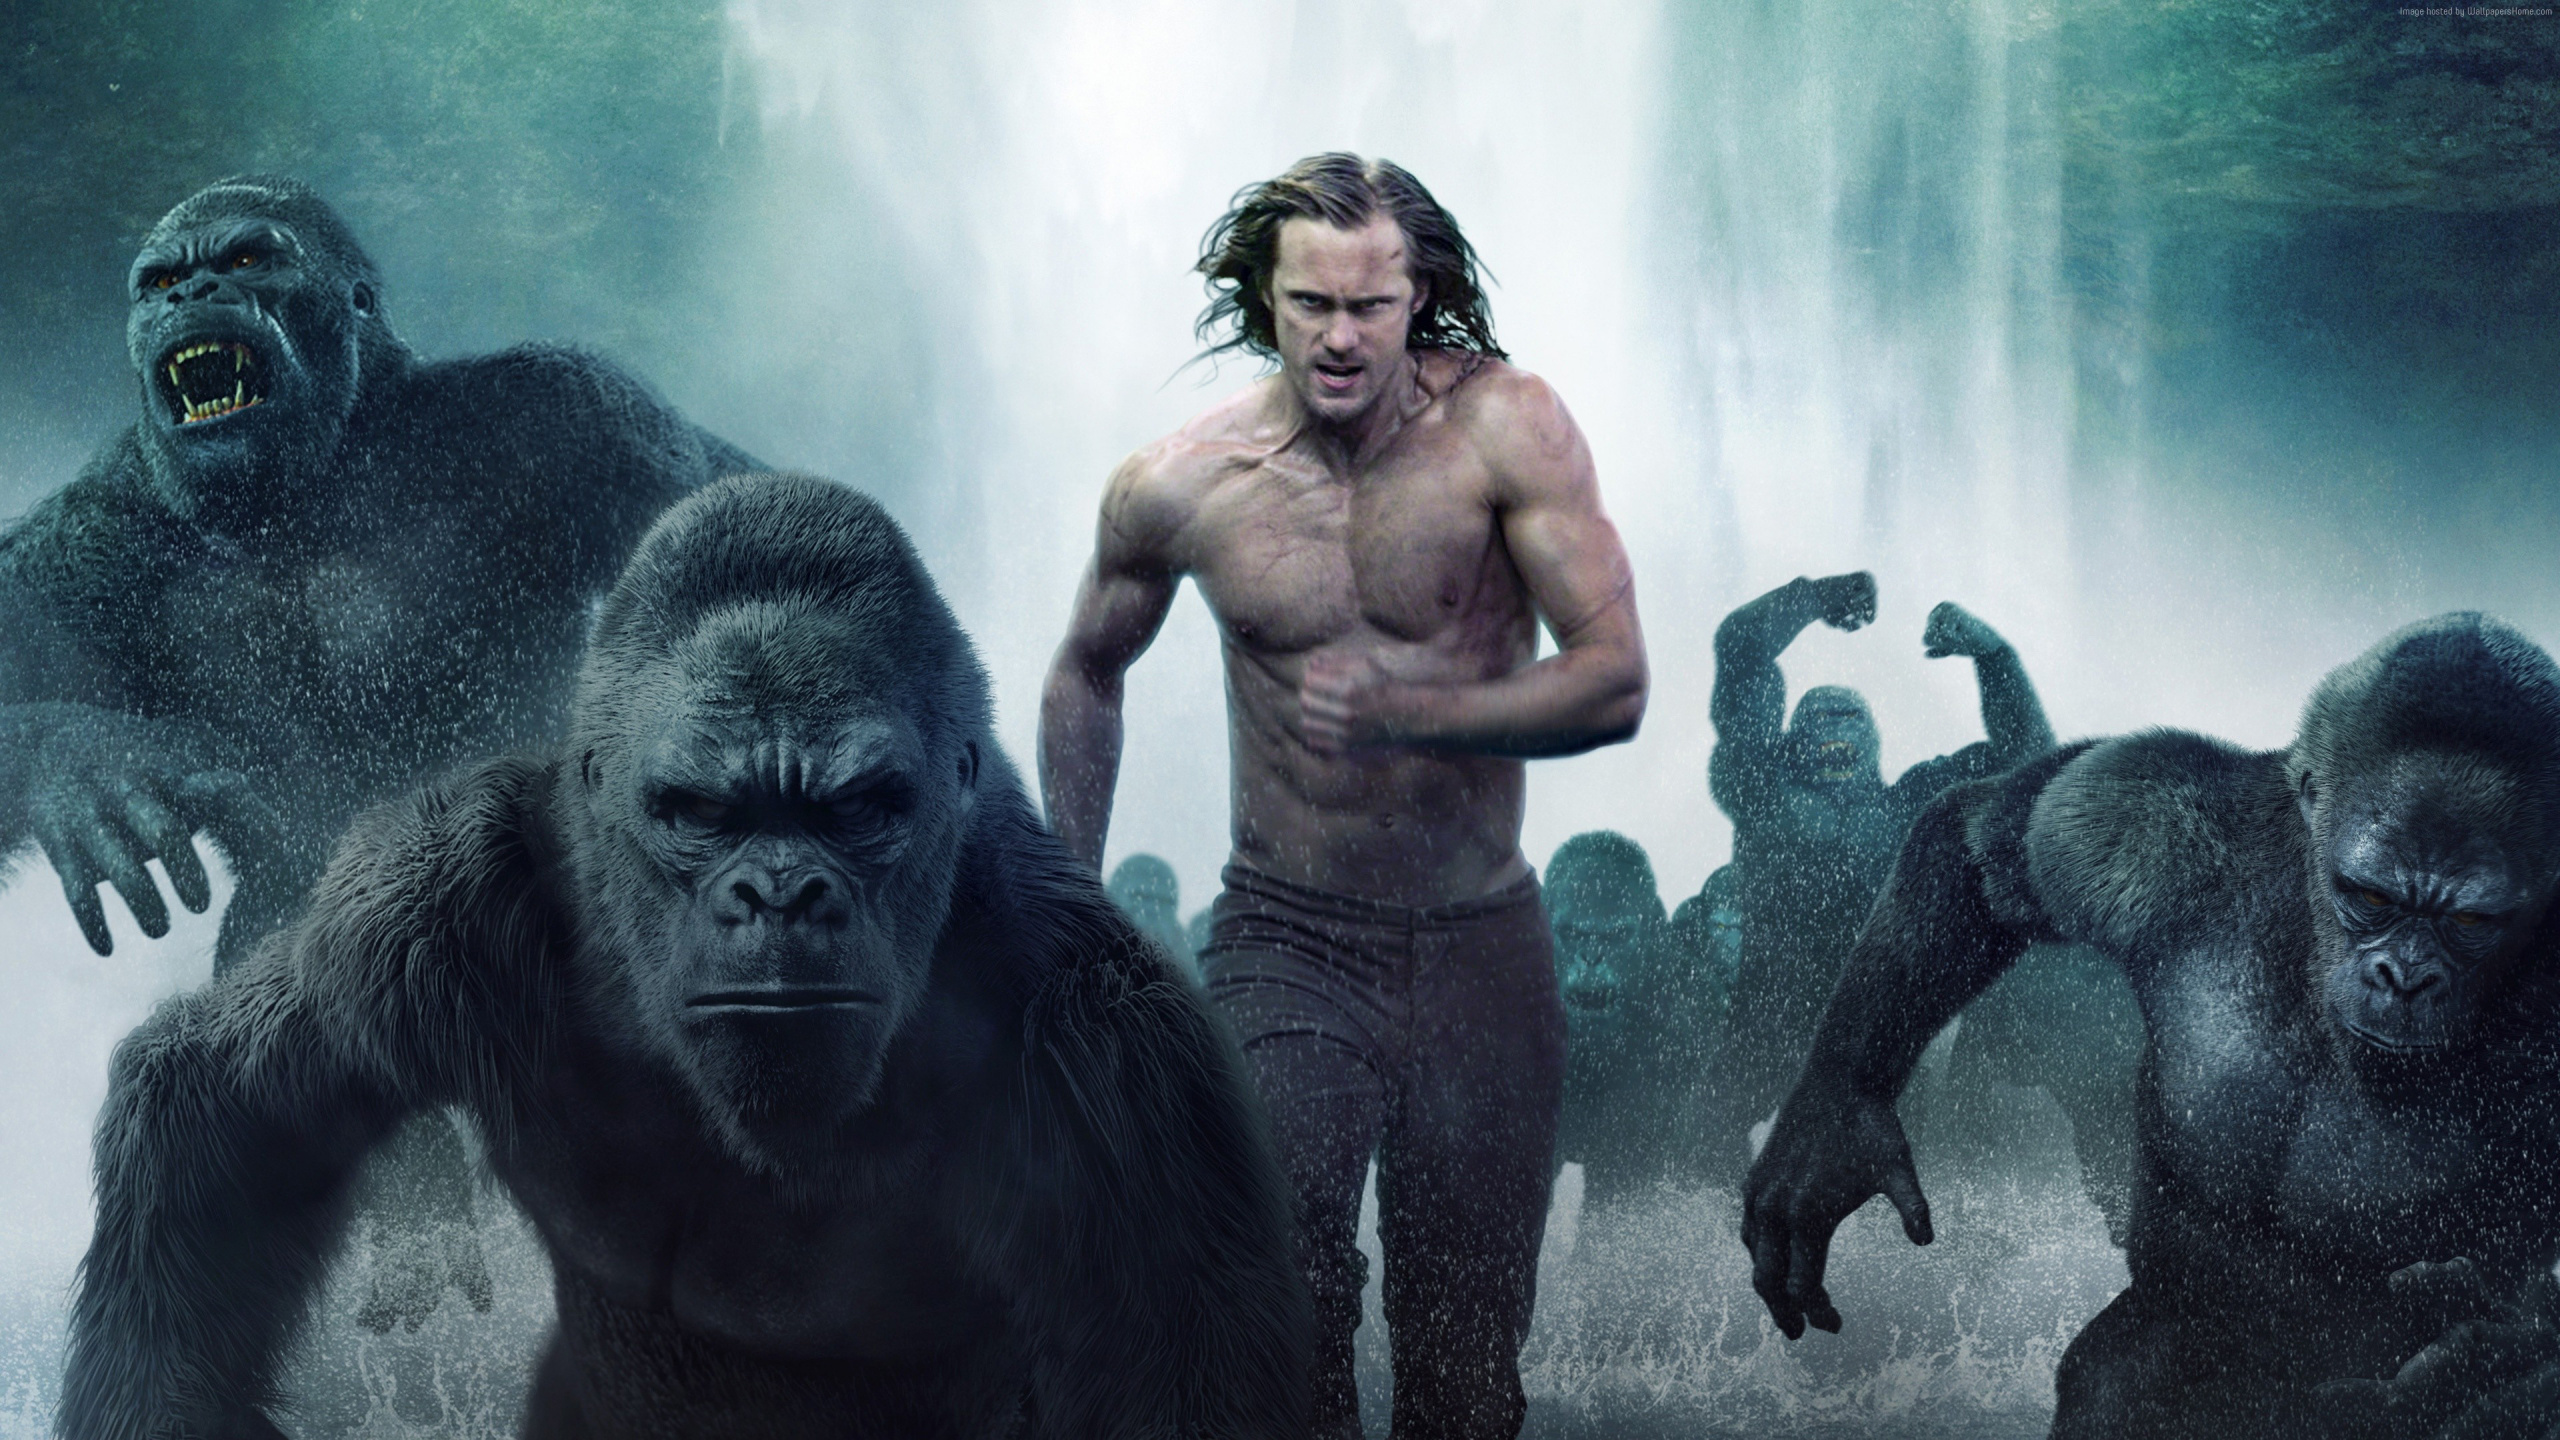 Topless Man and Gorilla in The Forest. Wallpaper in 2560x1440 Resolution